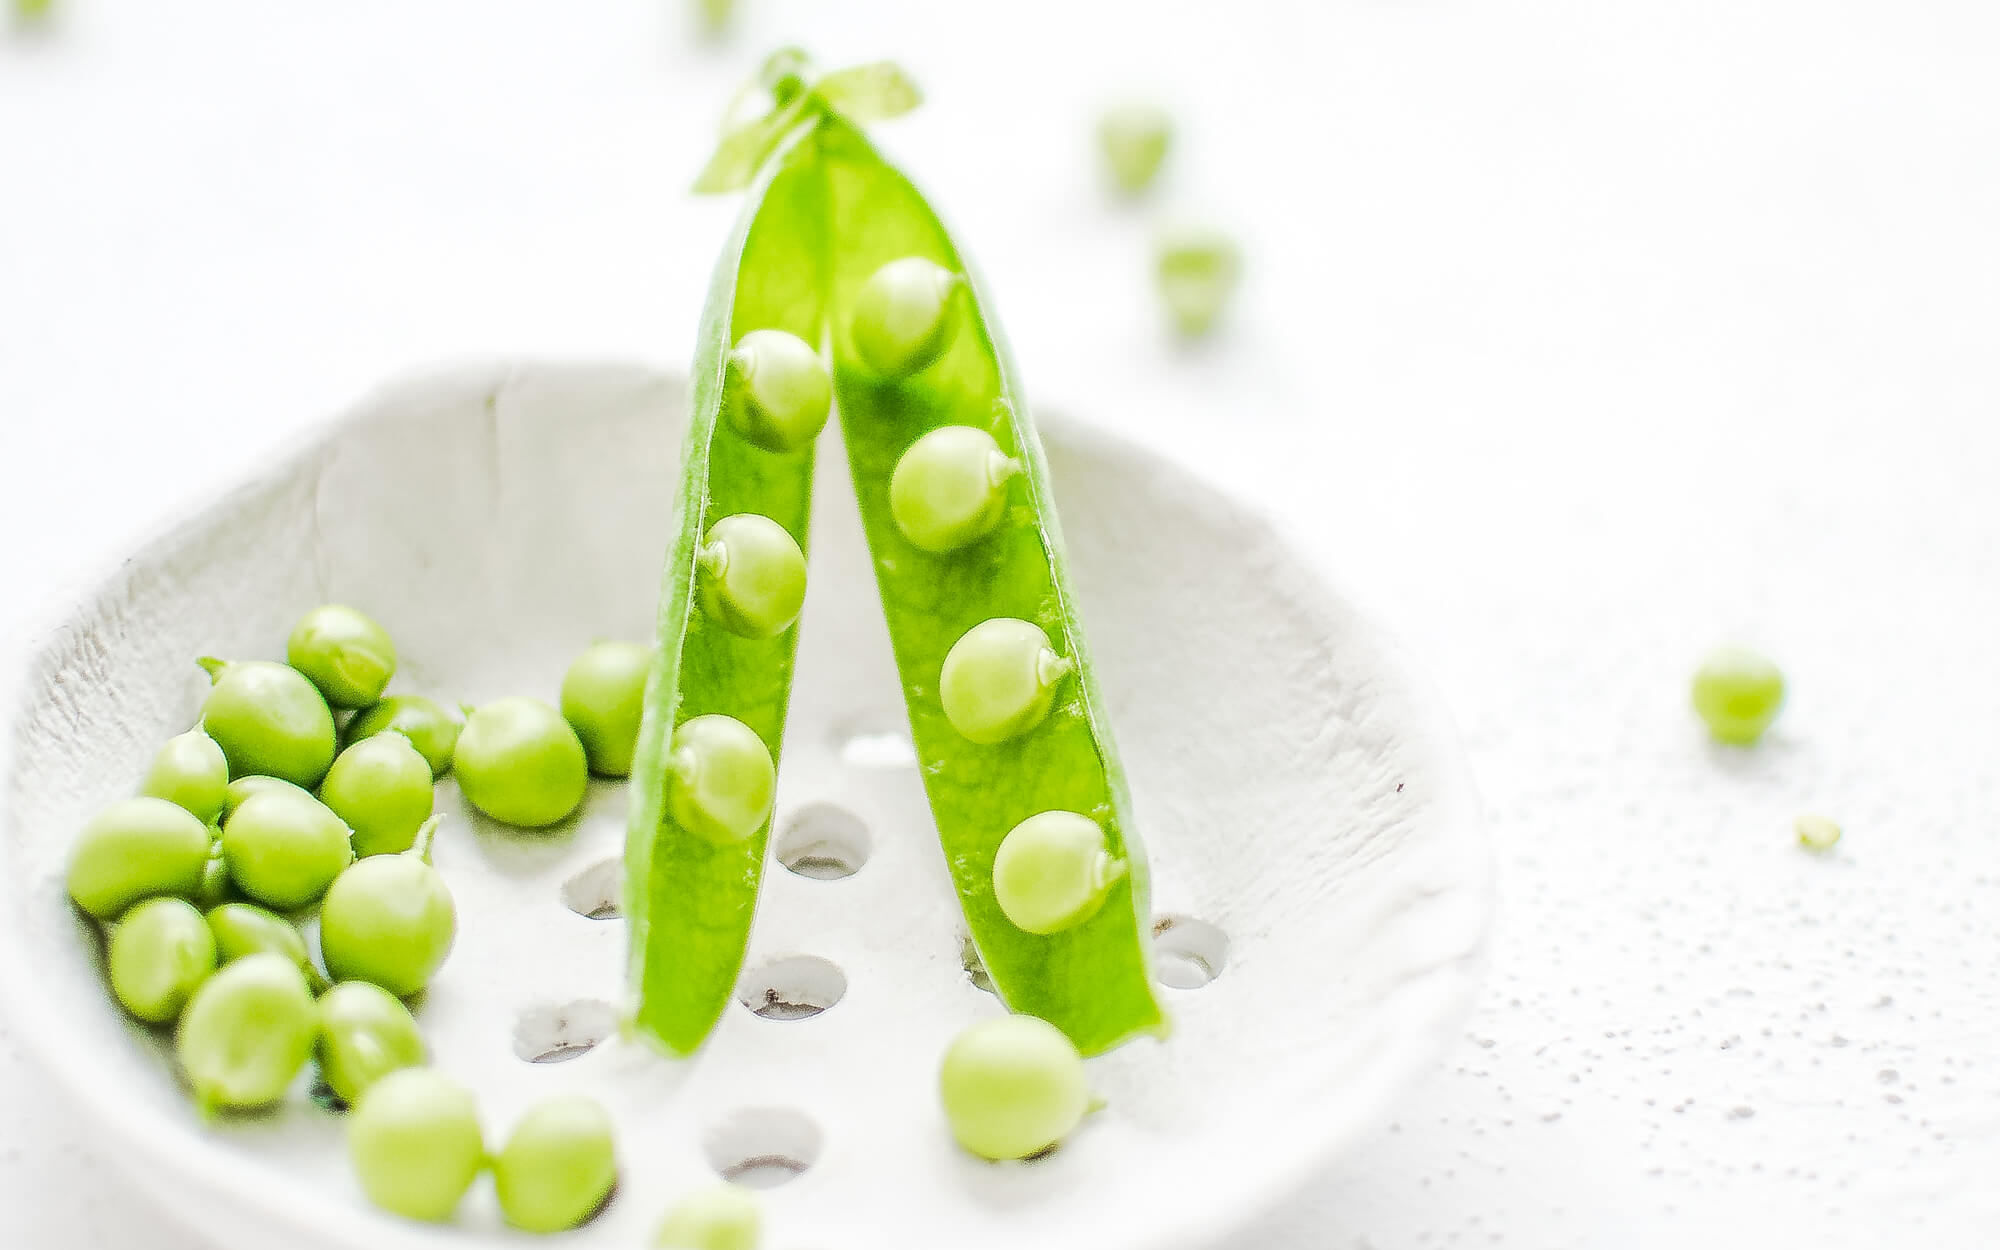 edamame offers soy health benefits